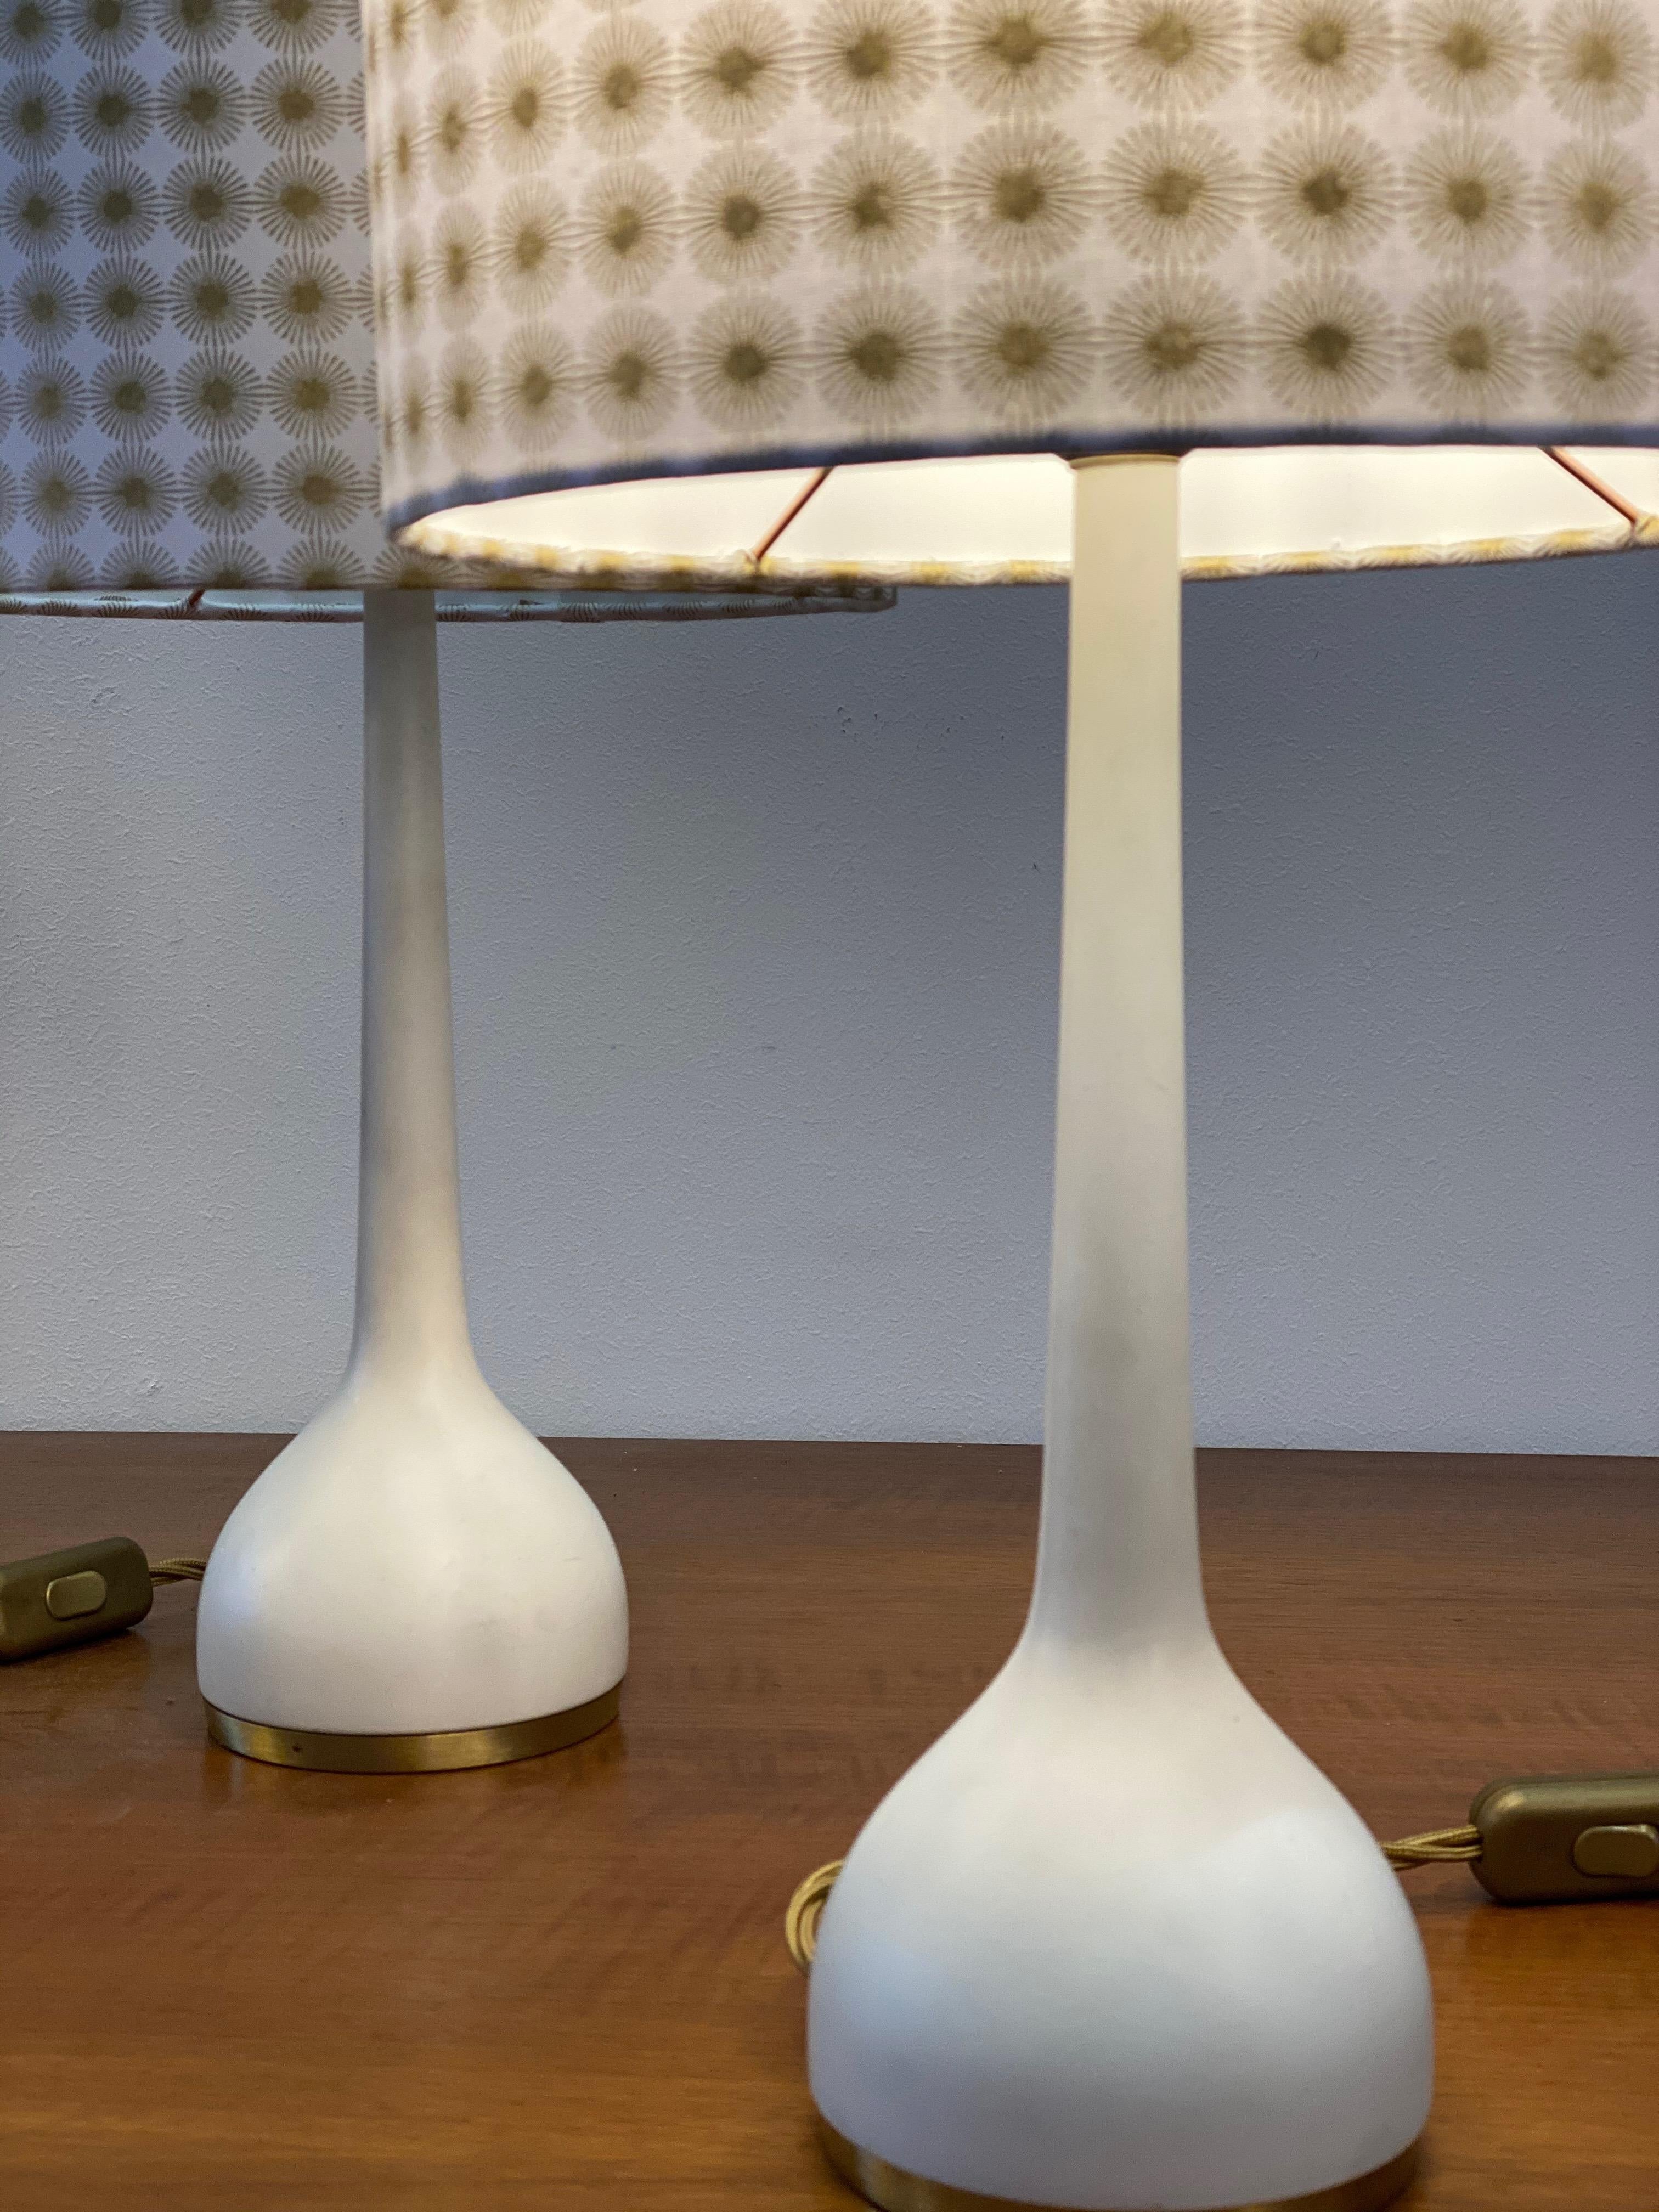 These table lamps were designed by Hans-Agne Jakobsson in the 1960s and manufactured by Hans Agne Jakobsson AB in Markaryd, Sweden. It comprises a white lacquered base with original fabric shades. The bas as well as the shades are marked with the